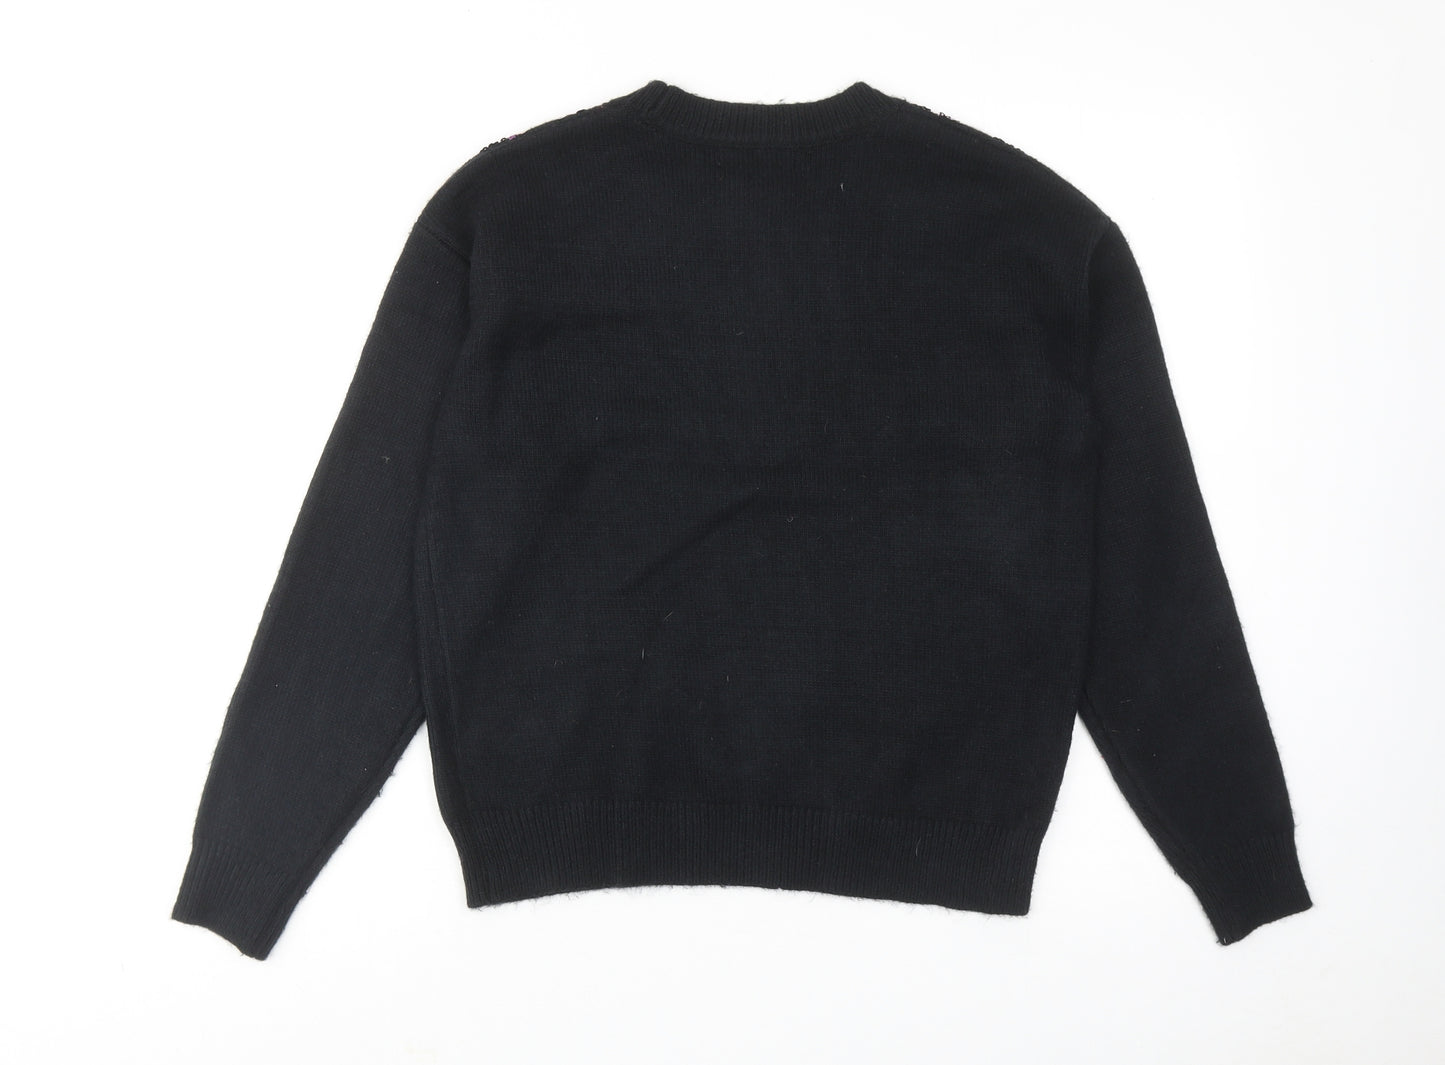 Marks and Spencer Womens Black Round Neck Acrylic Pullover Jumper Size S